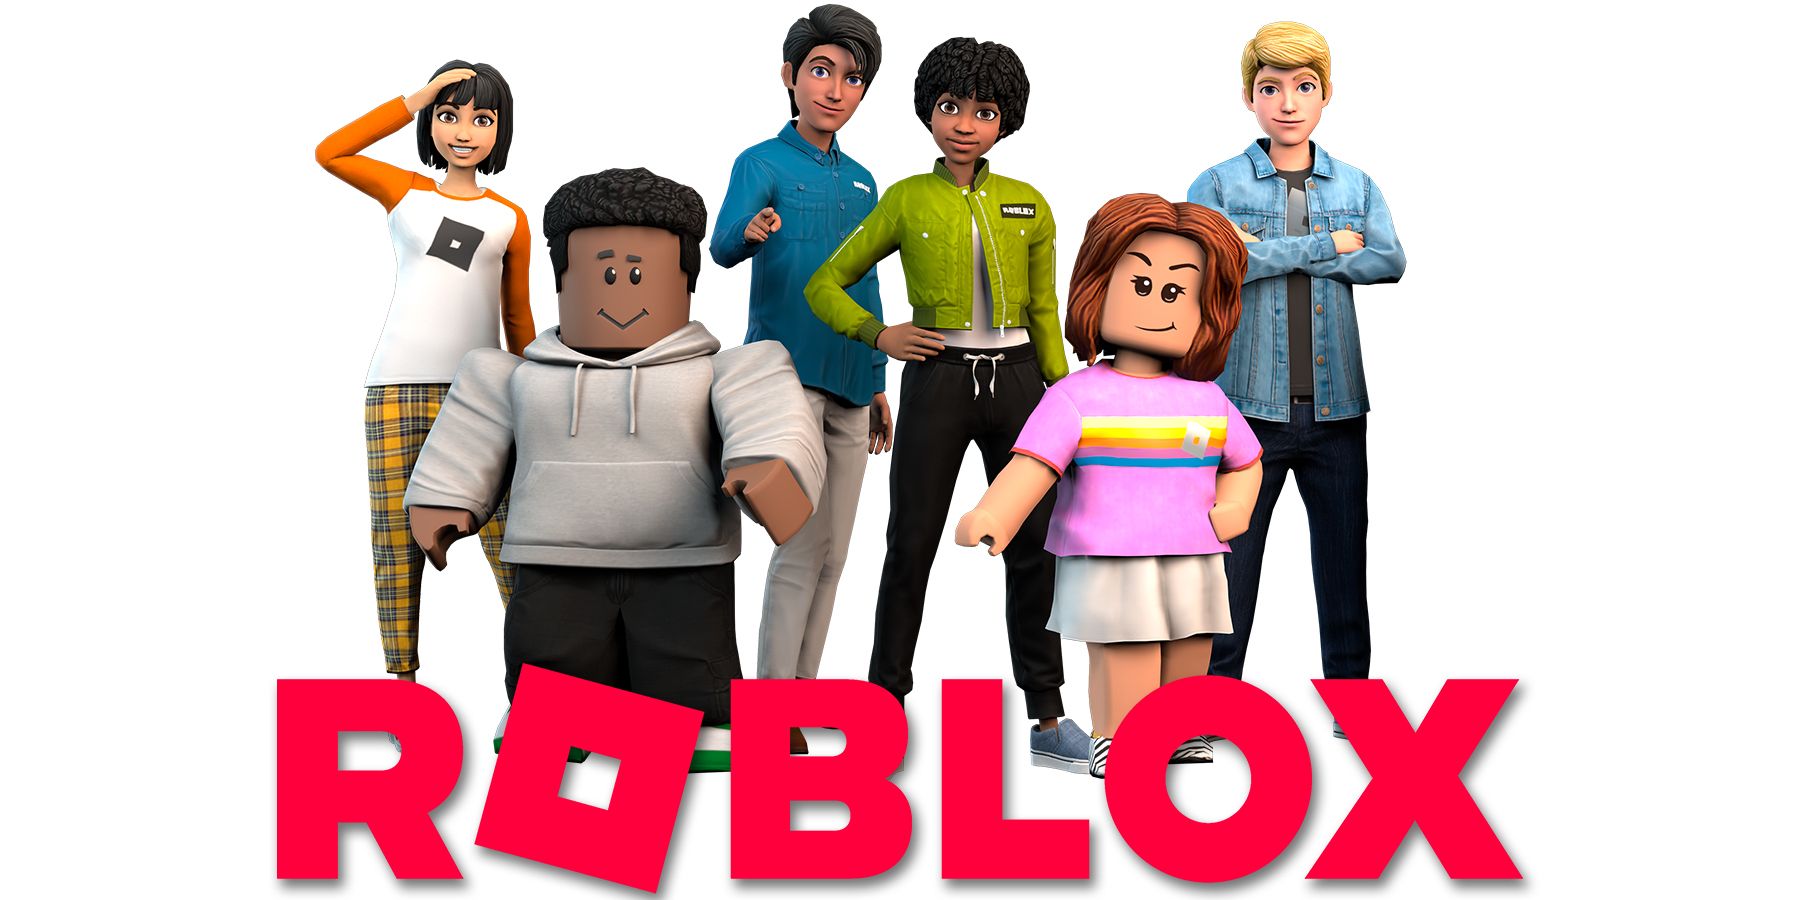 Roblox character lineup with magenta game logo